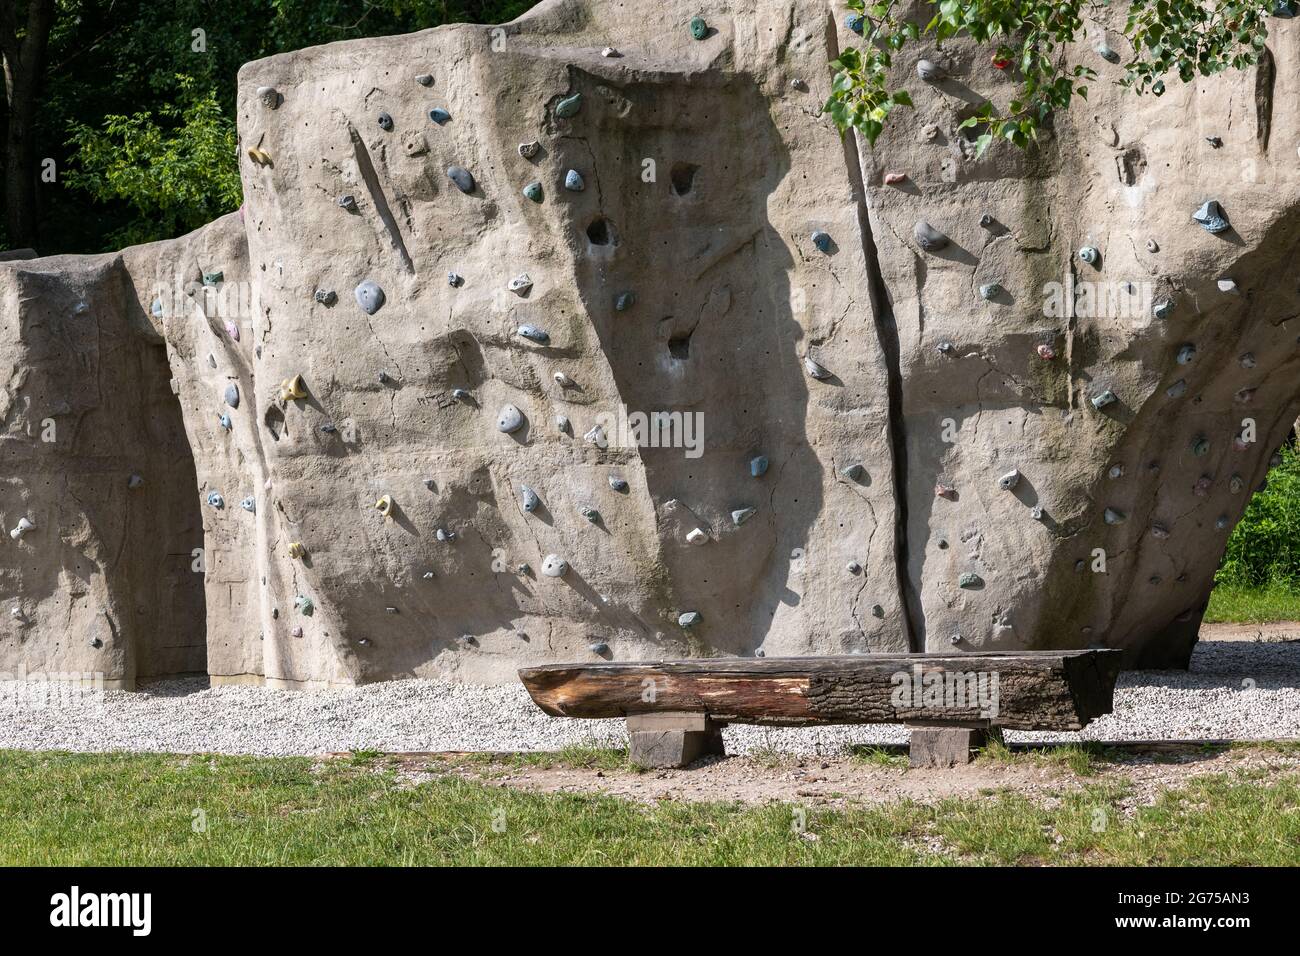 Public climbing wall in urban park, manmade rock with holds and grips for hands and feet. Stock Photo